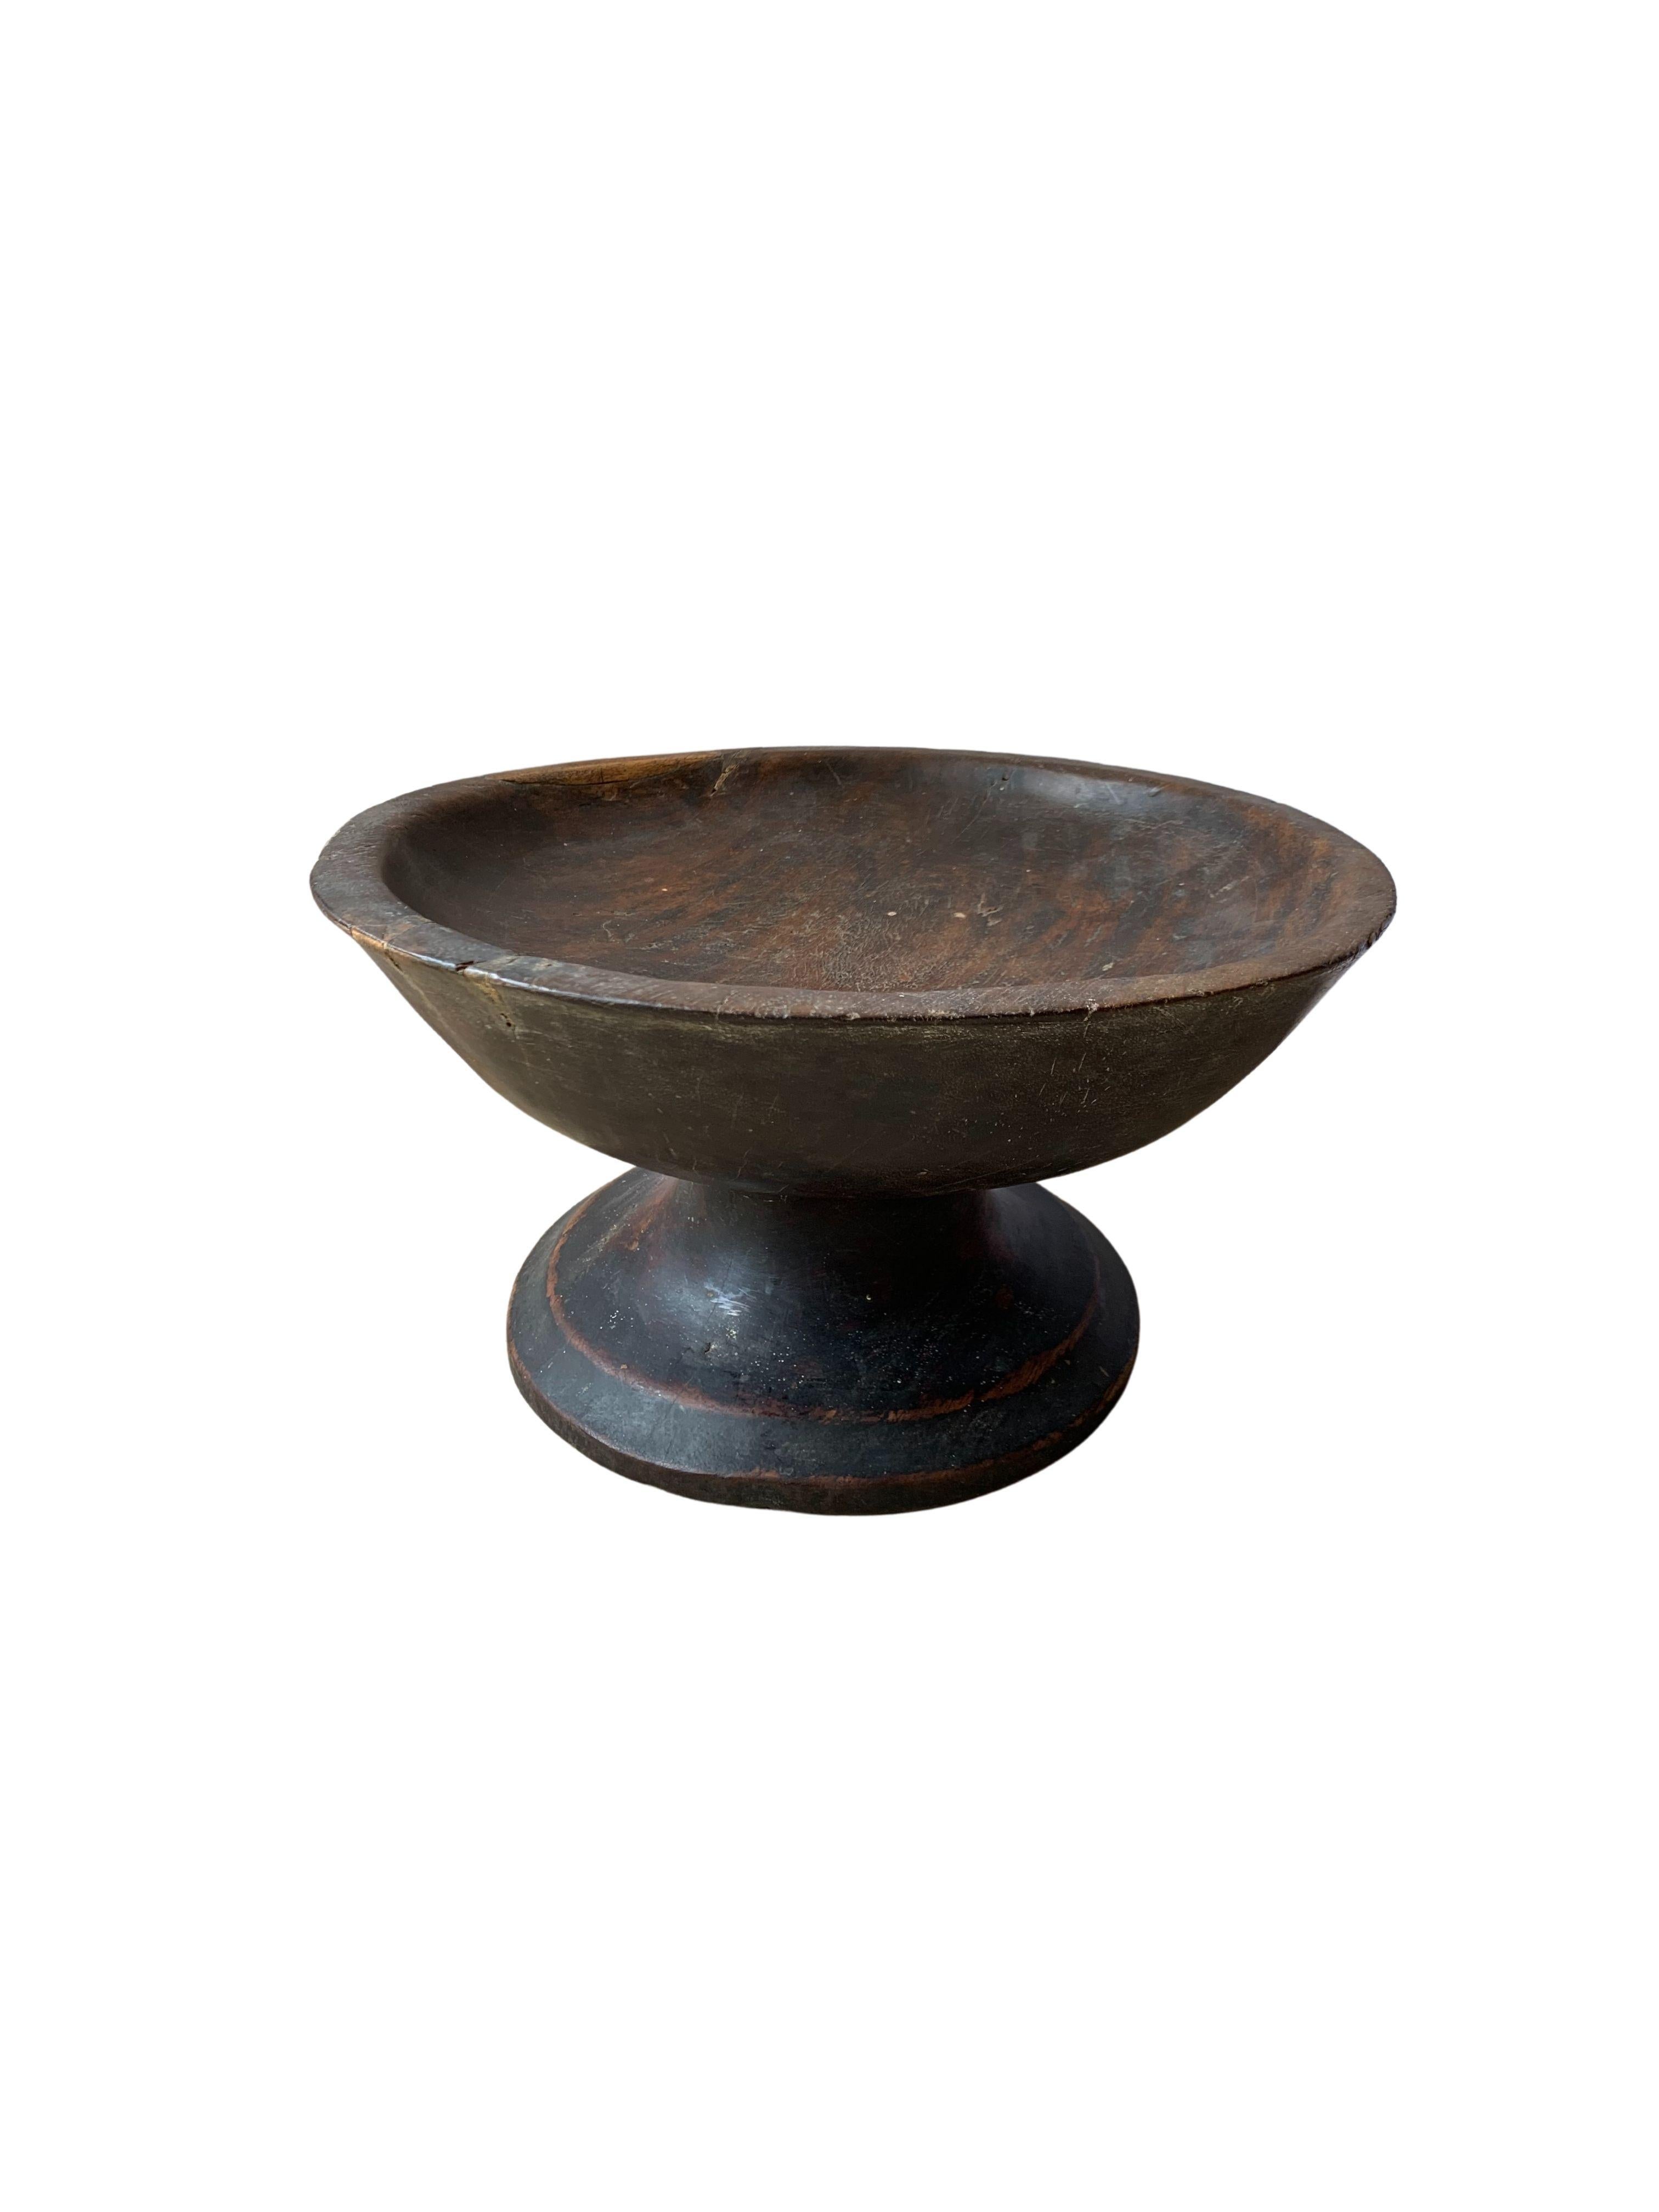 Batak tribe ceremonial bowl from jackfruit wood, early 20th century. The Batak Tribes are ethnic groups predominantly found in North Sumatra, Indonesia. 

